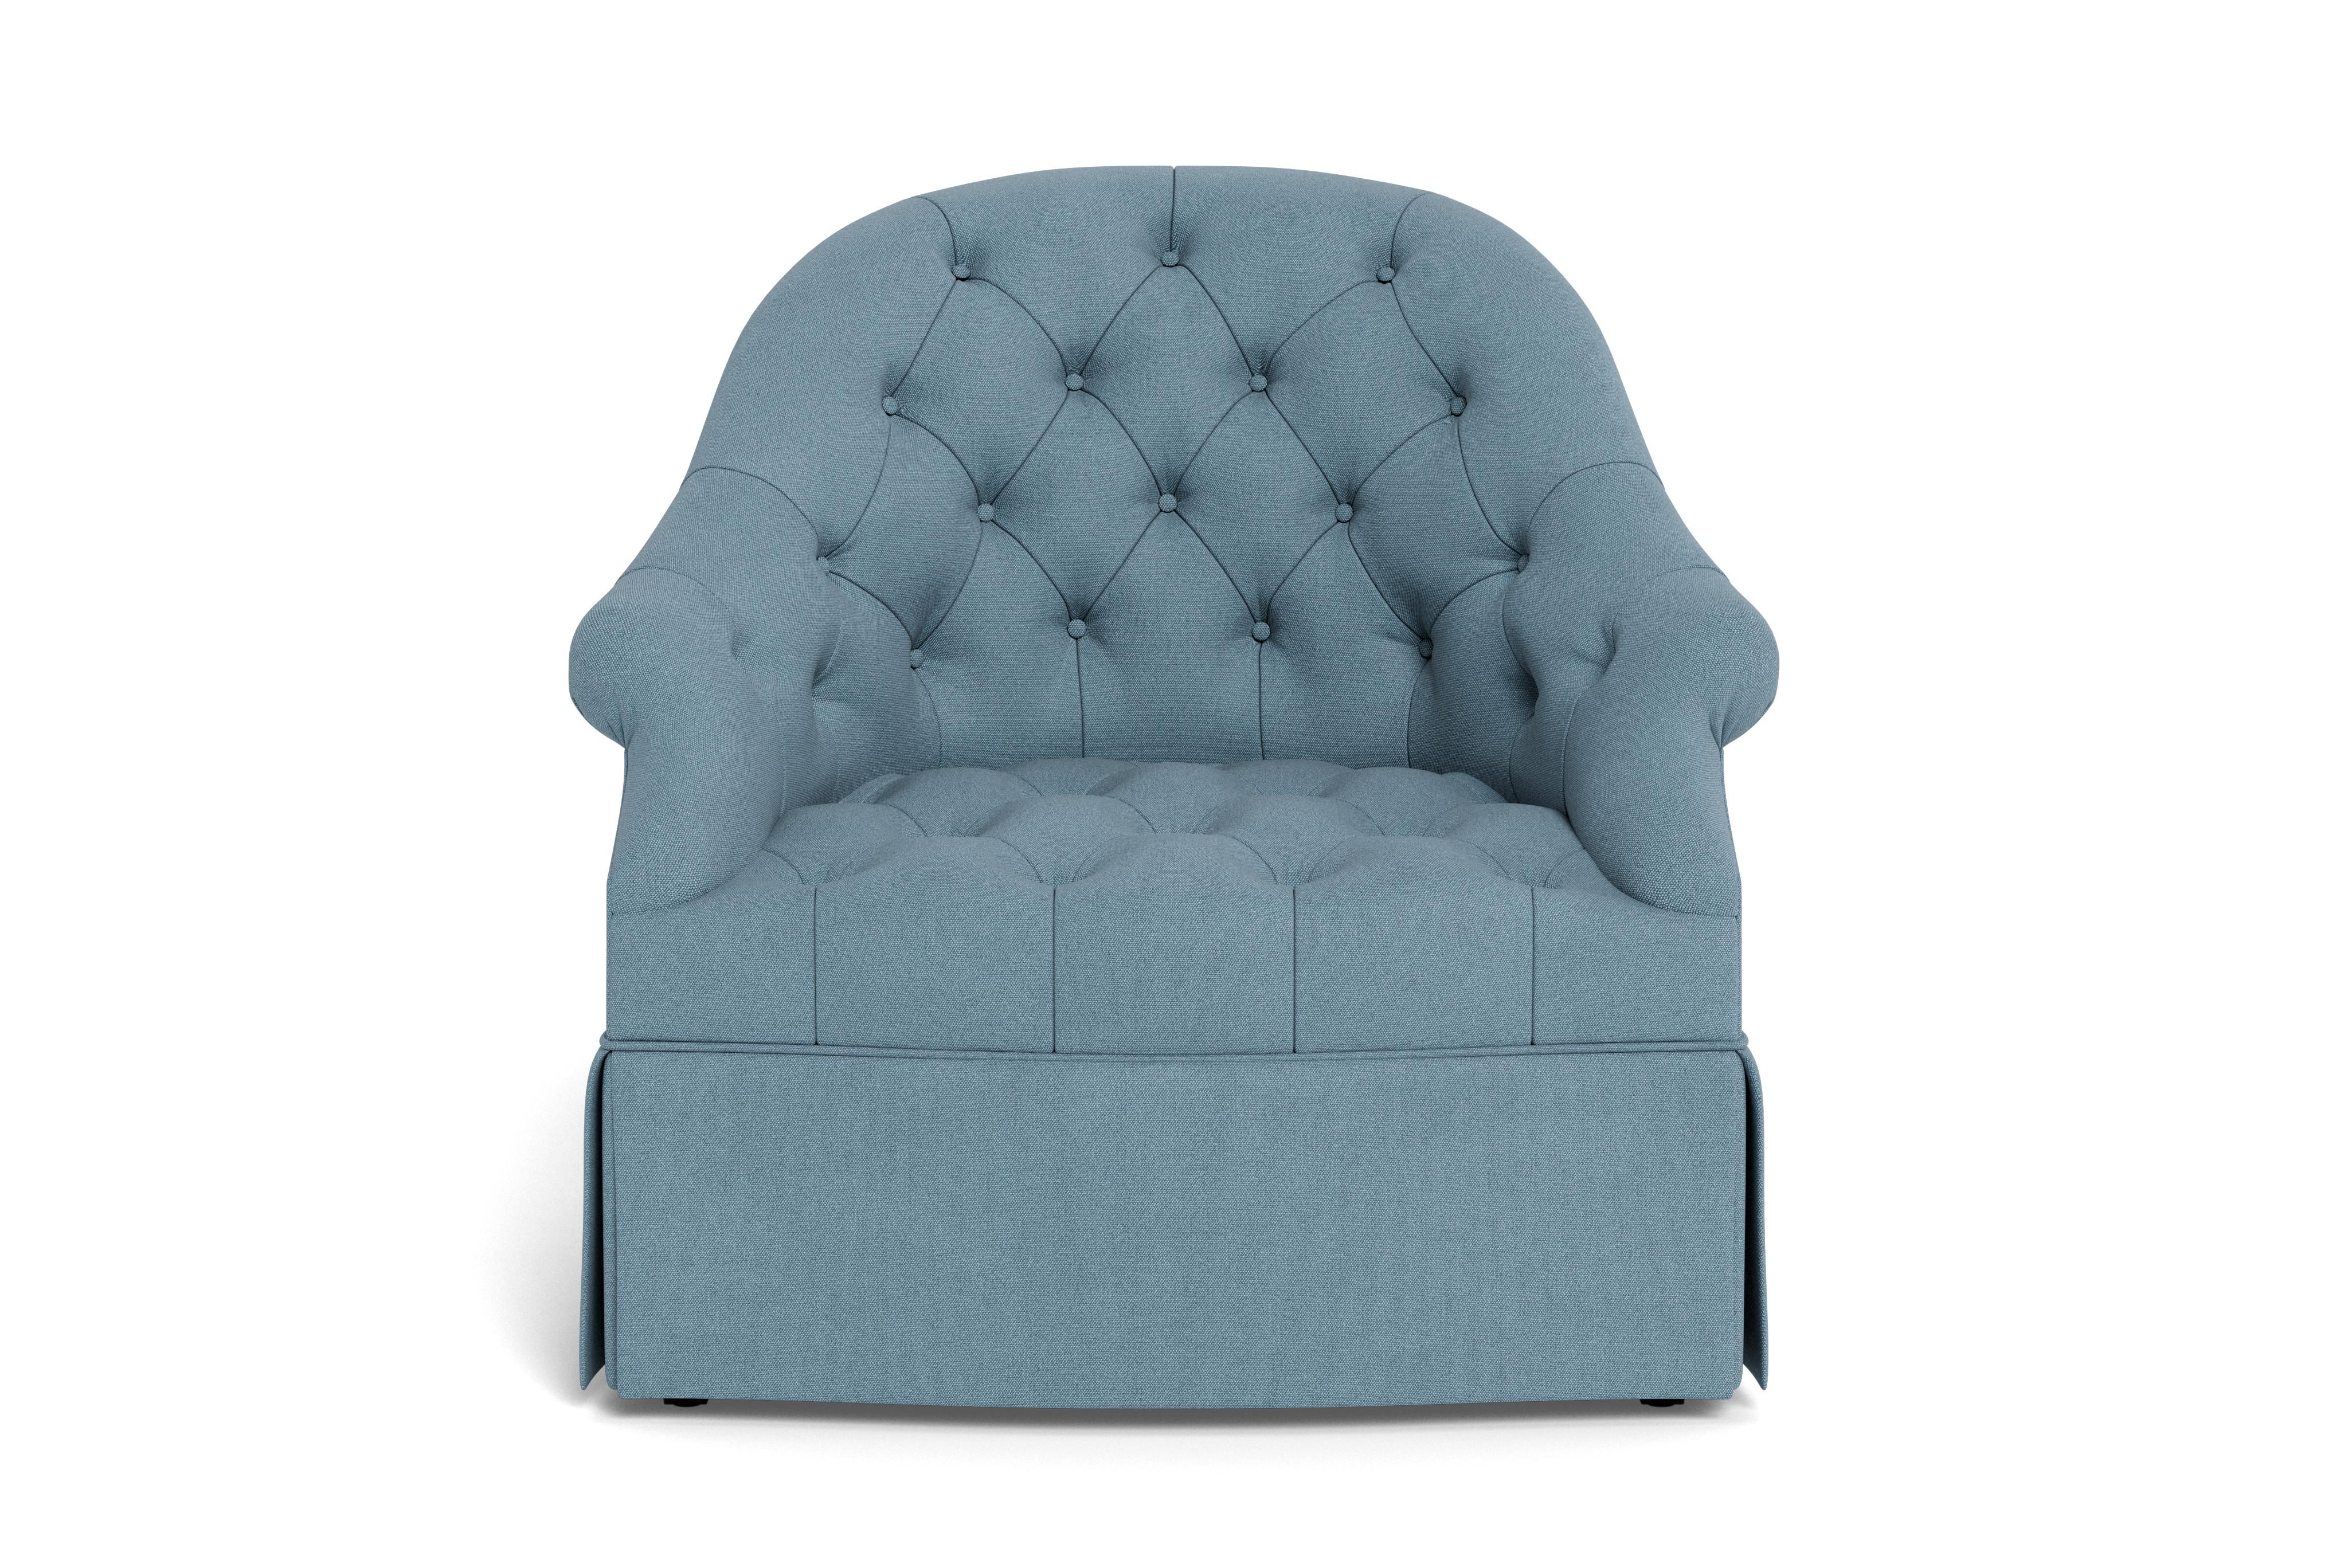 Bunny believes that every room should showcase a mix of upholstery with legs and with skirts to add texture and interest. So we've transformed our popular T42 Chair with an elegant skirt. As with our T42 Chair, you'll find it hard to resist its soft